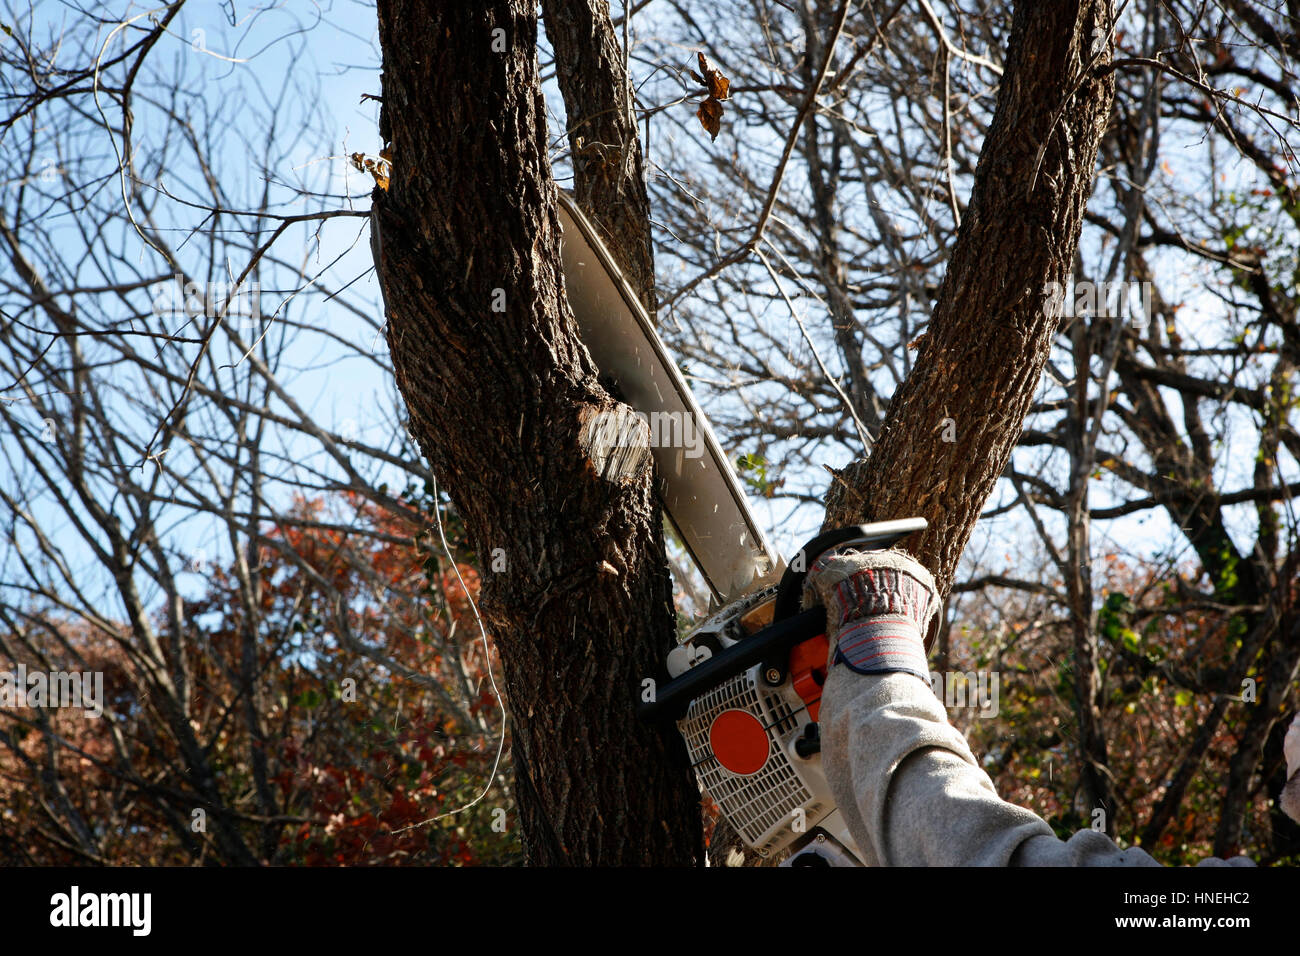                         Save  Download Preview     Trimming tree with electric saw - environmental labor-hand of worker Stock Photo